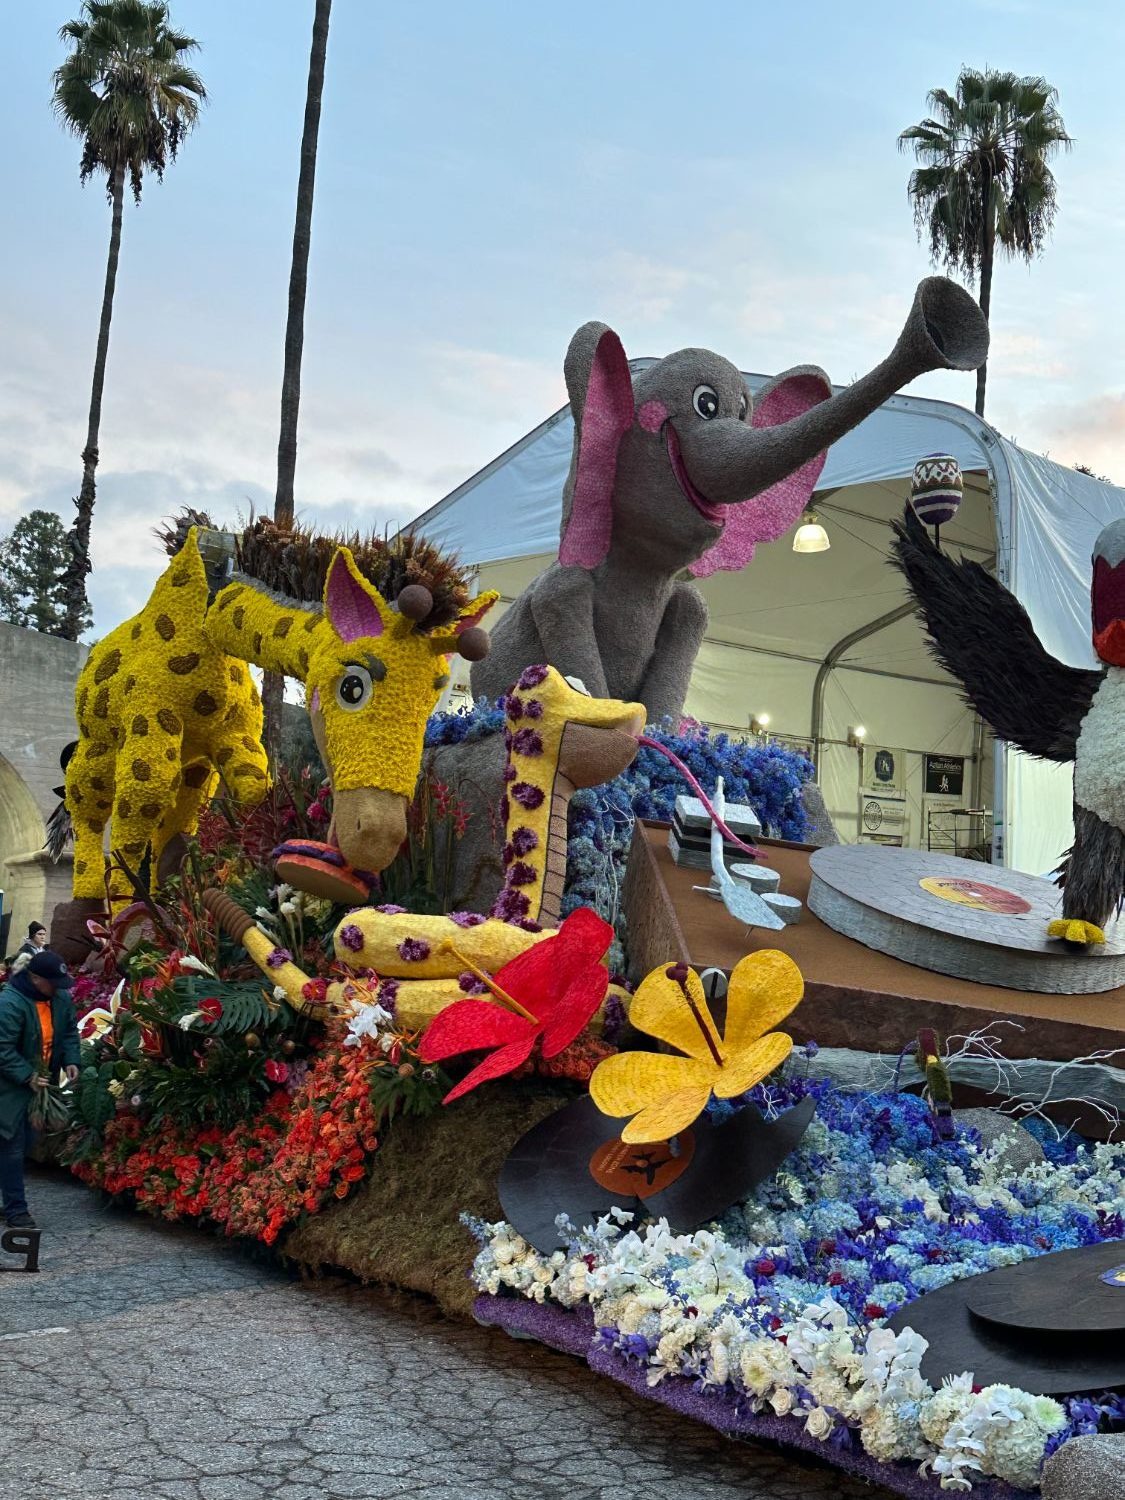 PHOTO: Bill Glazier | The South Pasadenan | South Pasadena Tournament of Roses 2024 float at the Tournament of Roses final judging on December 31, 2023. 